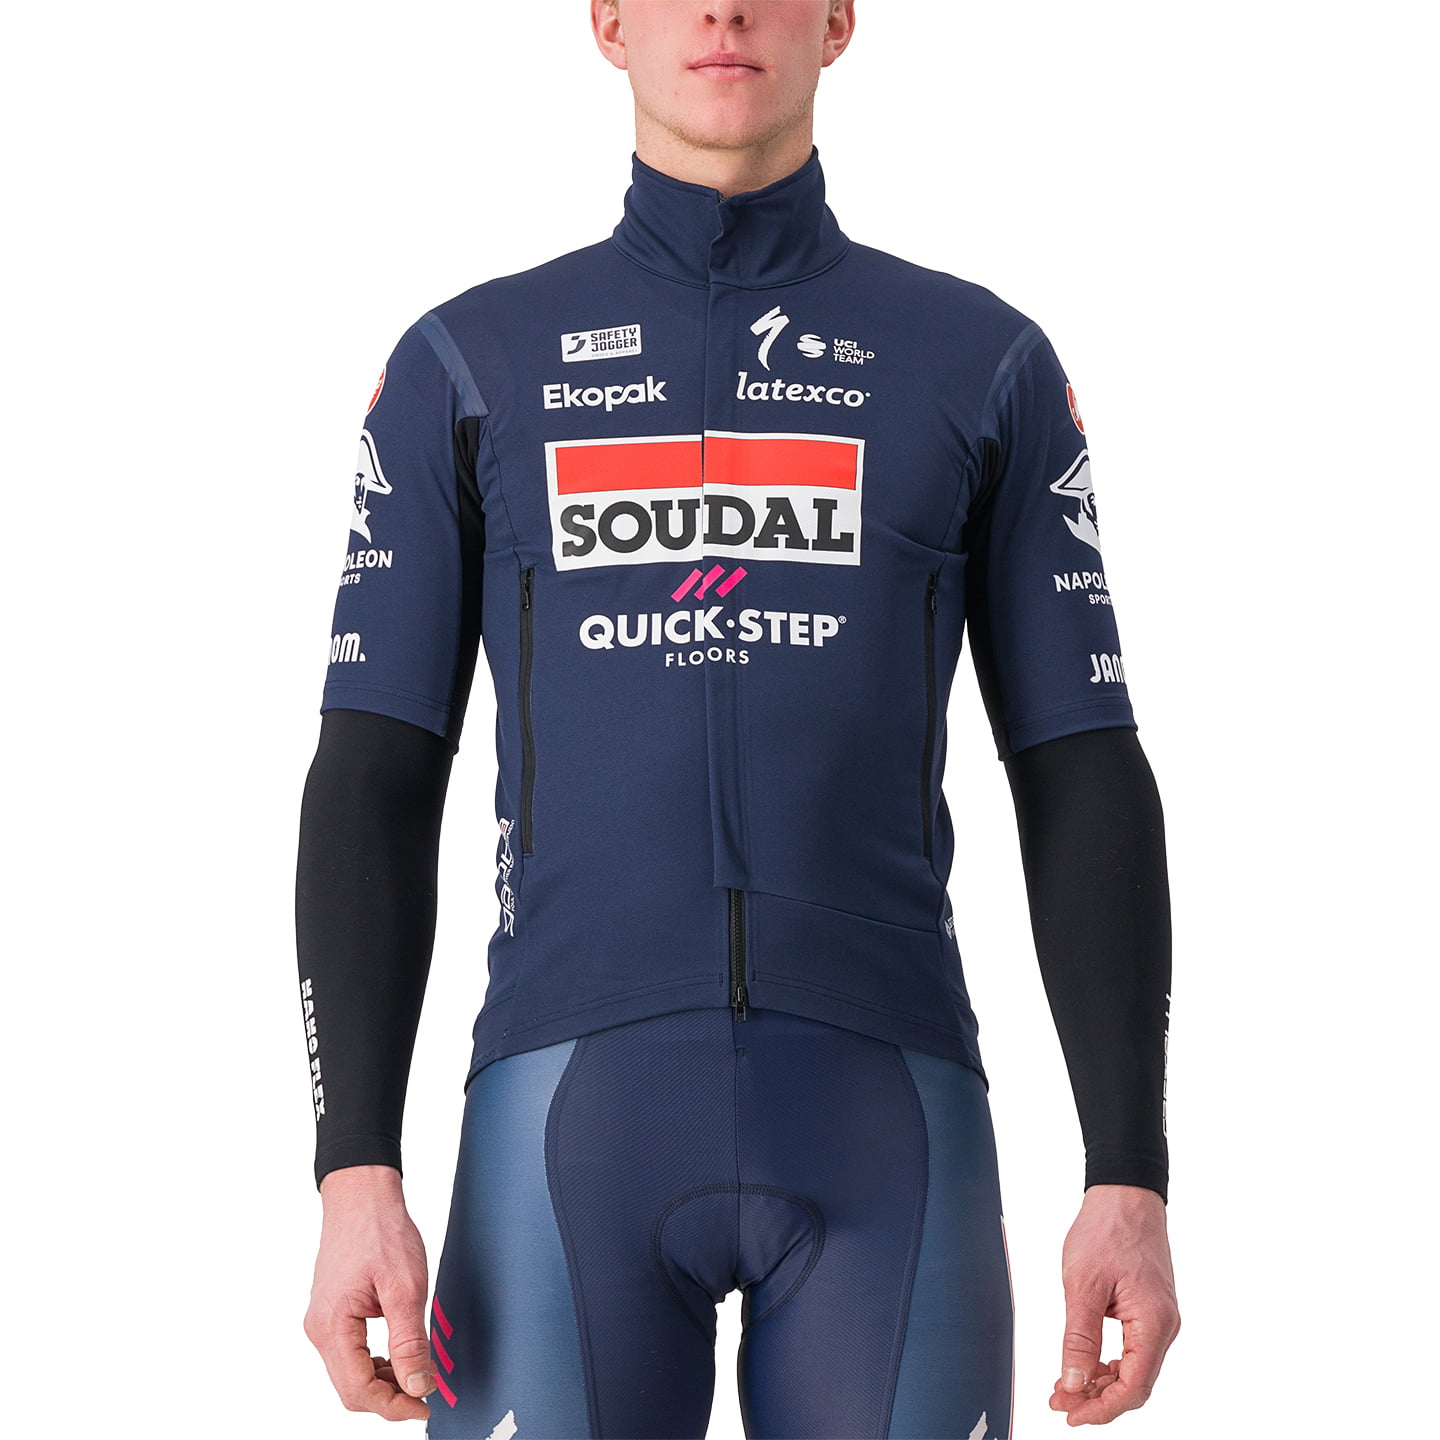 SOUDAL QUICK-STEP Short Sleeve Gabba RoS 2 2023 Light Jacket, for men, size S, Cycle jacket, Cycling clothing